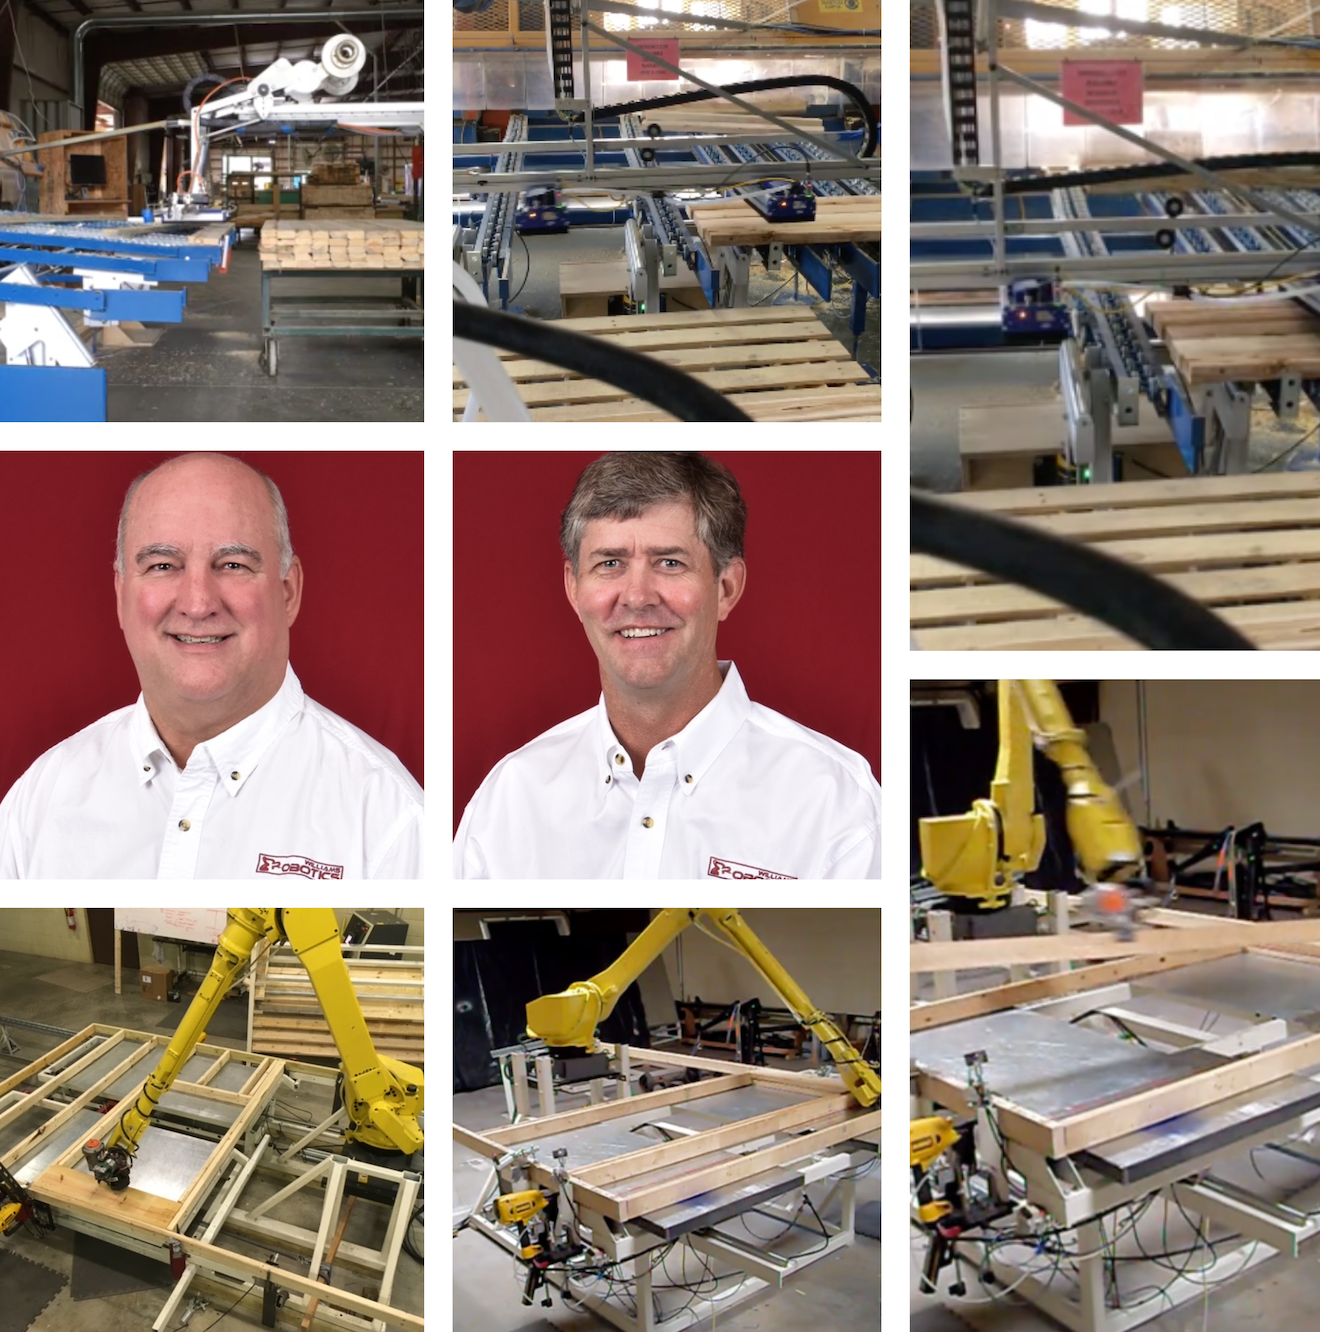 Jeff Williams and Walker Harris, co-founders of Williams Robotics, have adapted an auto assembly line robotic arm for homebuilding applications. Their robot assembles 2x4 or 2x6 stud walls ranging in height from 7 to 10 feet, while leaving rough openings for windows and doors. Images courtesy Williams Robotics 